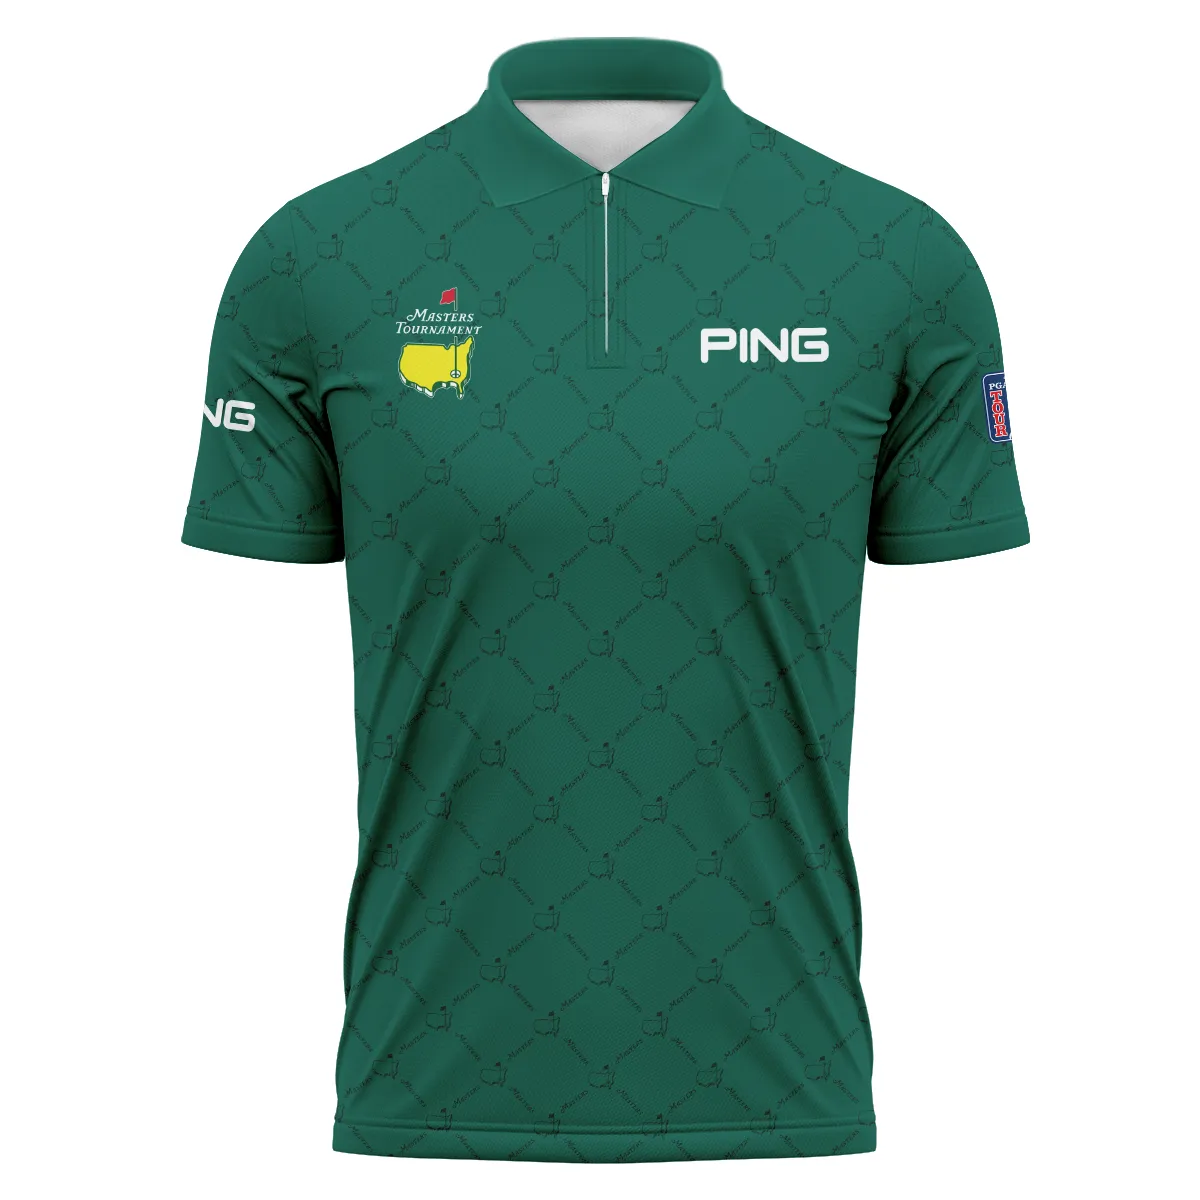 Golf Sport Pattern Color Green Mix Black Masters Tournament Ping Polo Shirt Style Classic